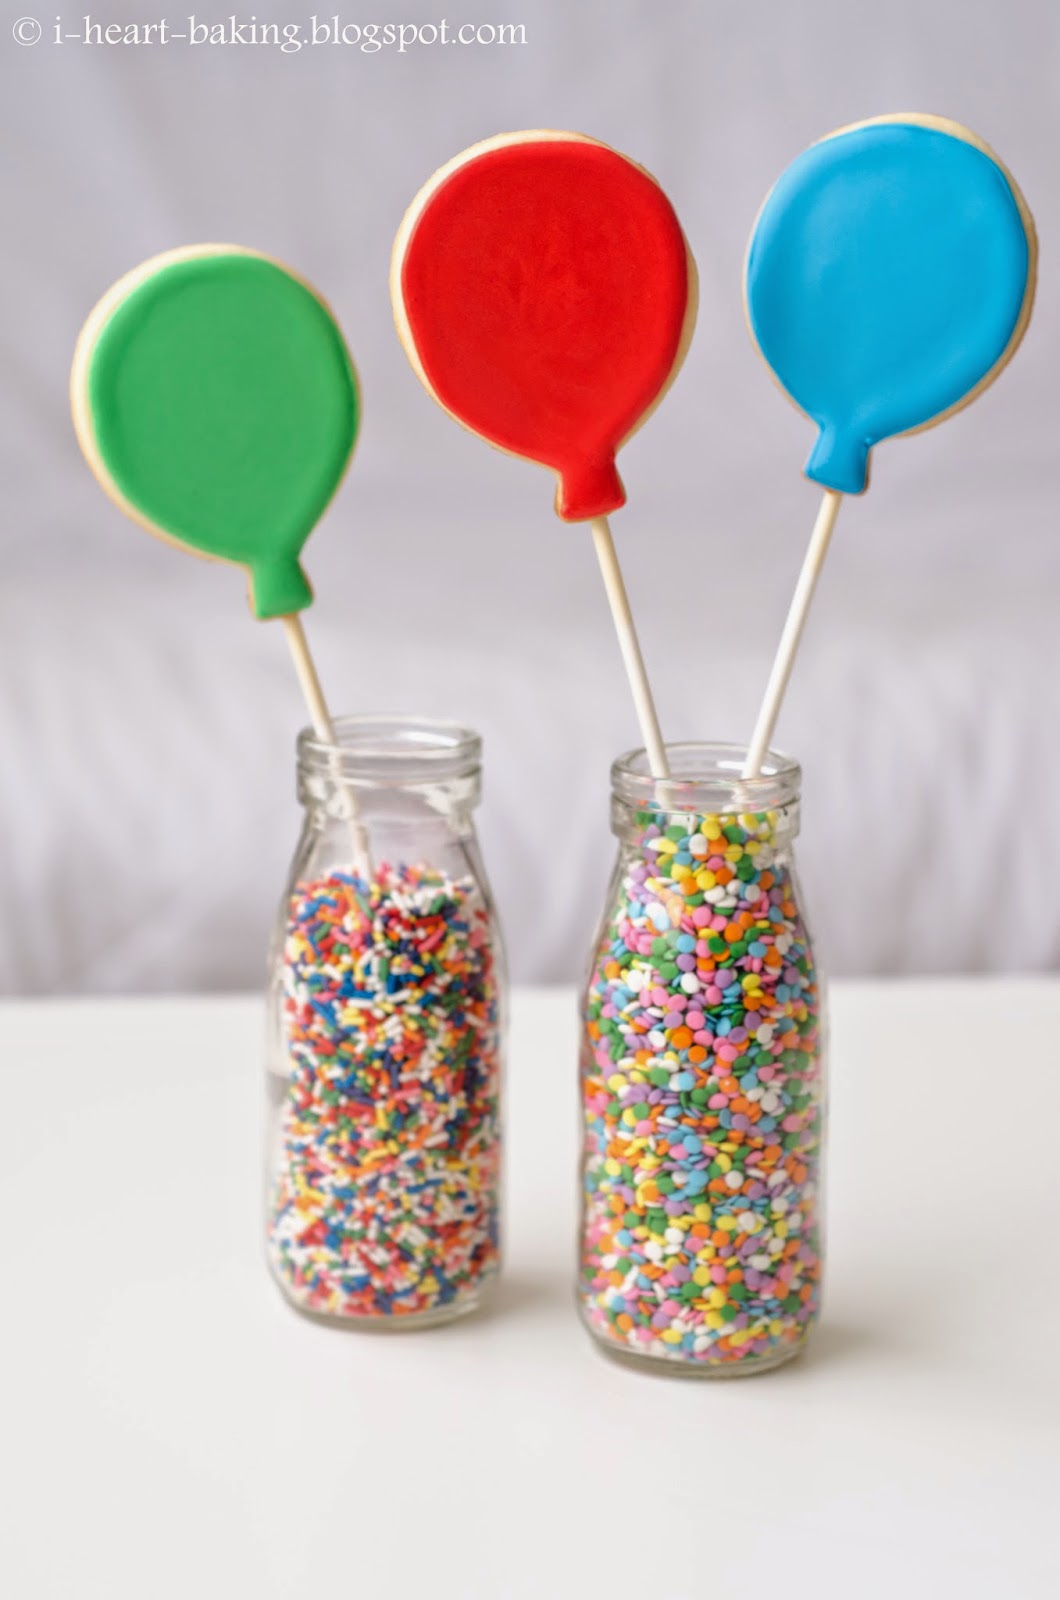 i heart baking!: balloon cookie pops on a stick